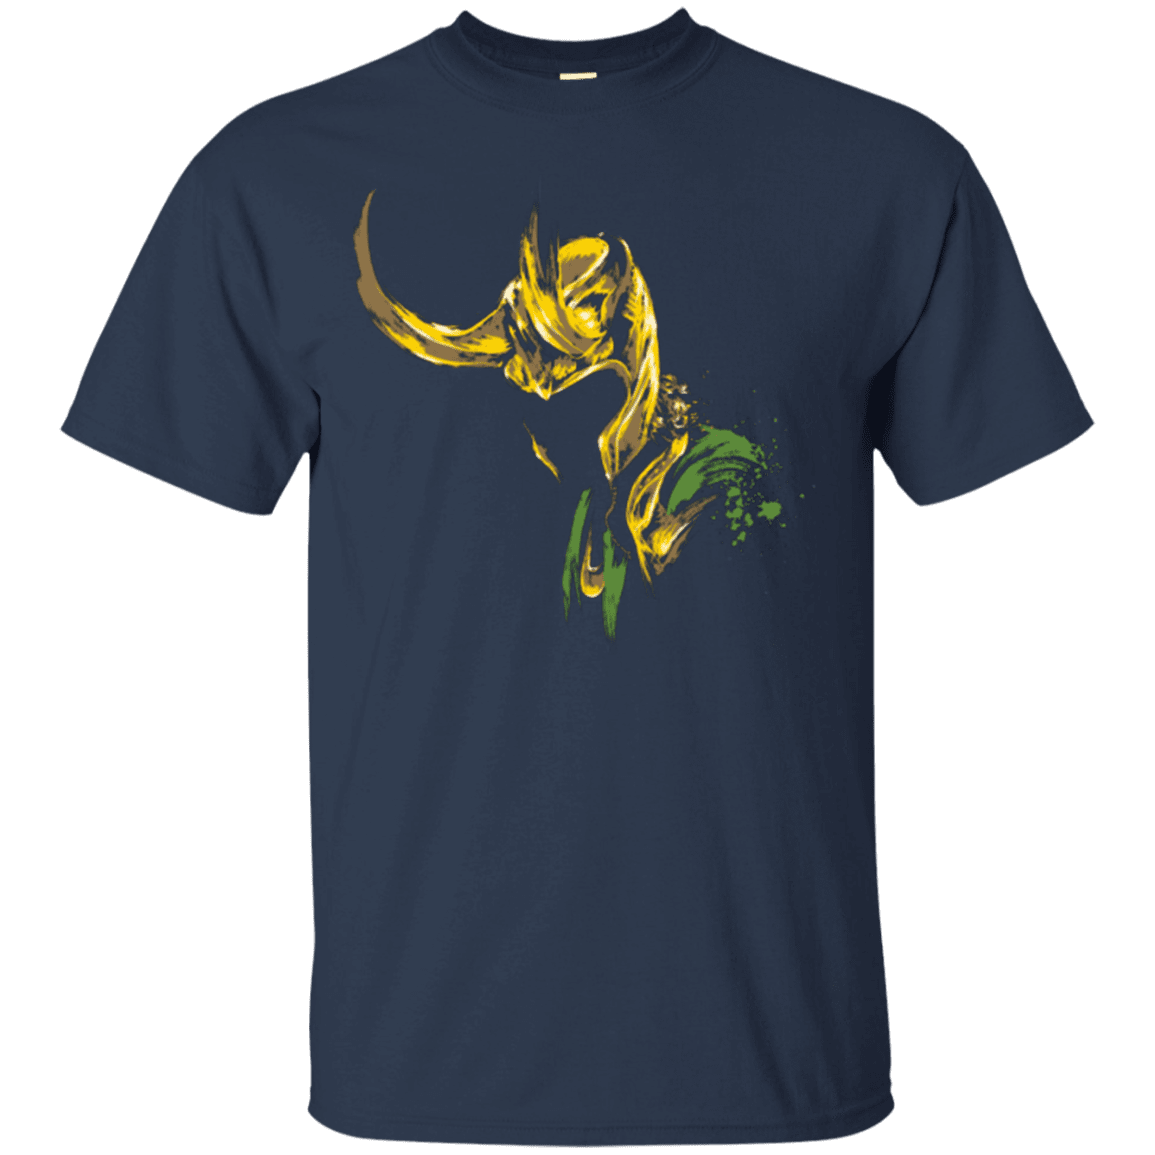 T-Shirts Navy / Small PRINCE OF MISCHIEF T-Shirt